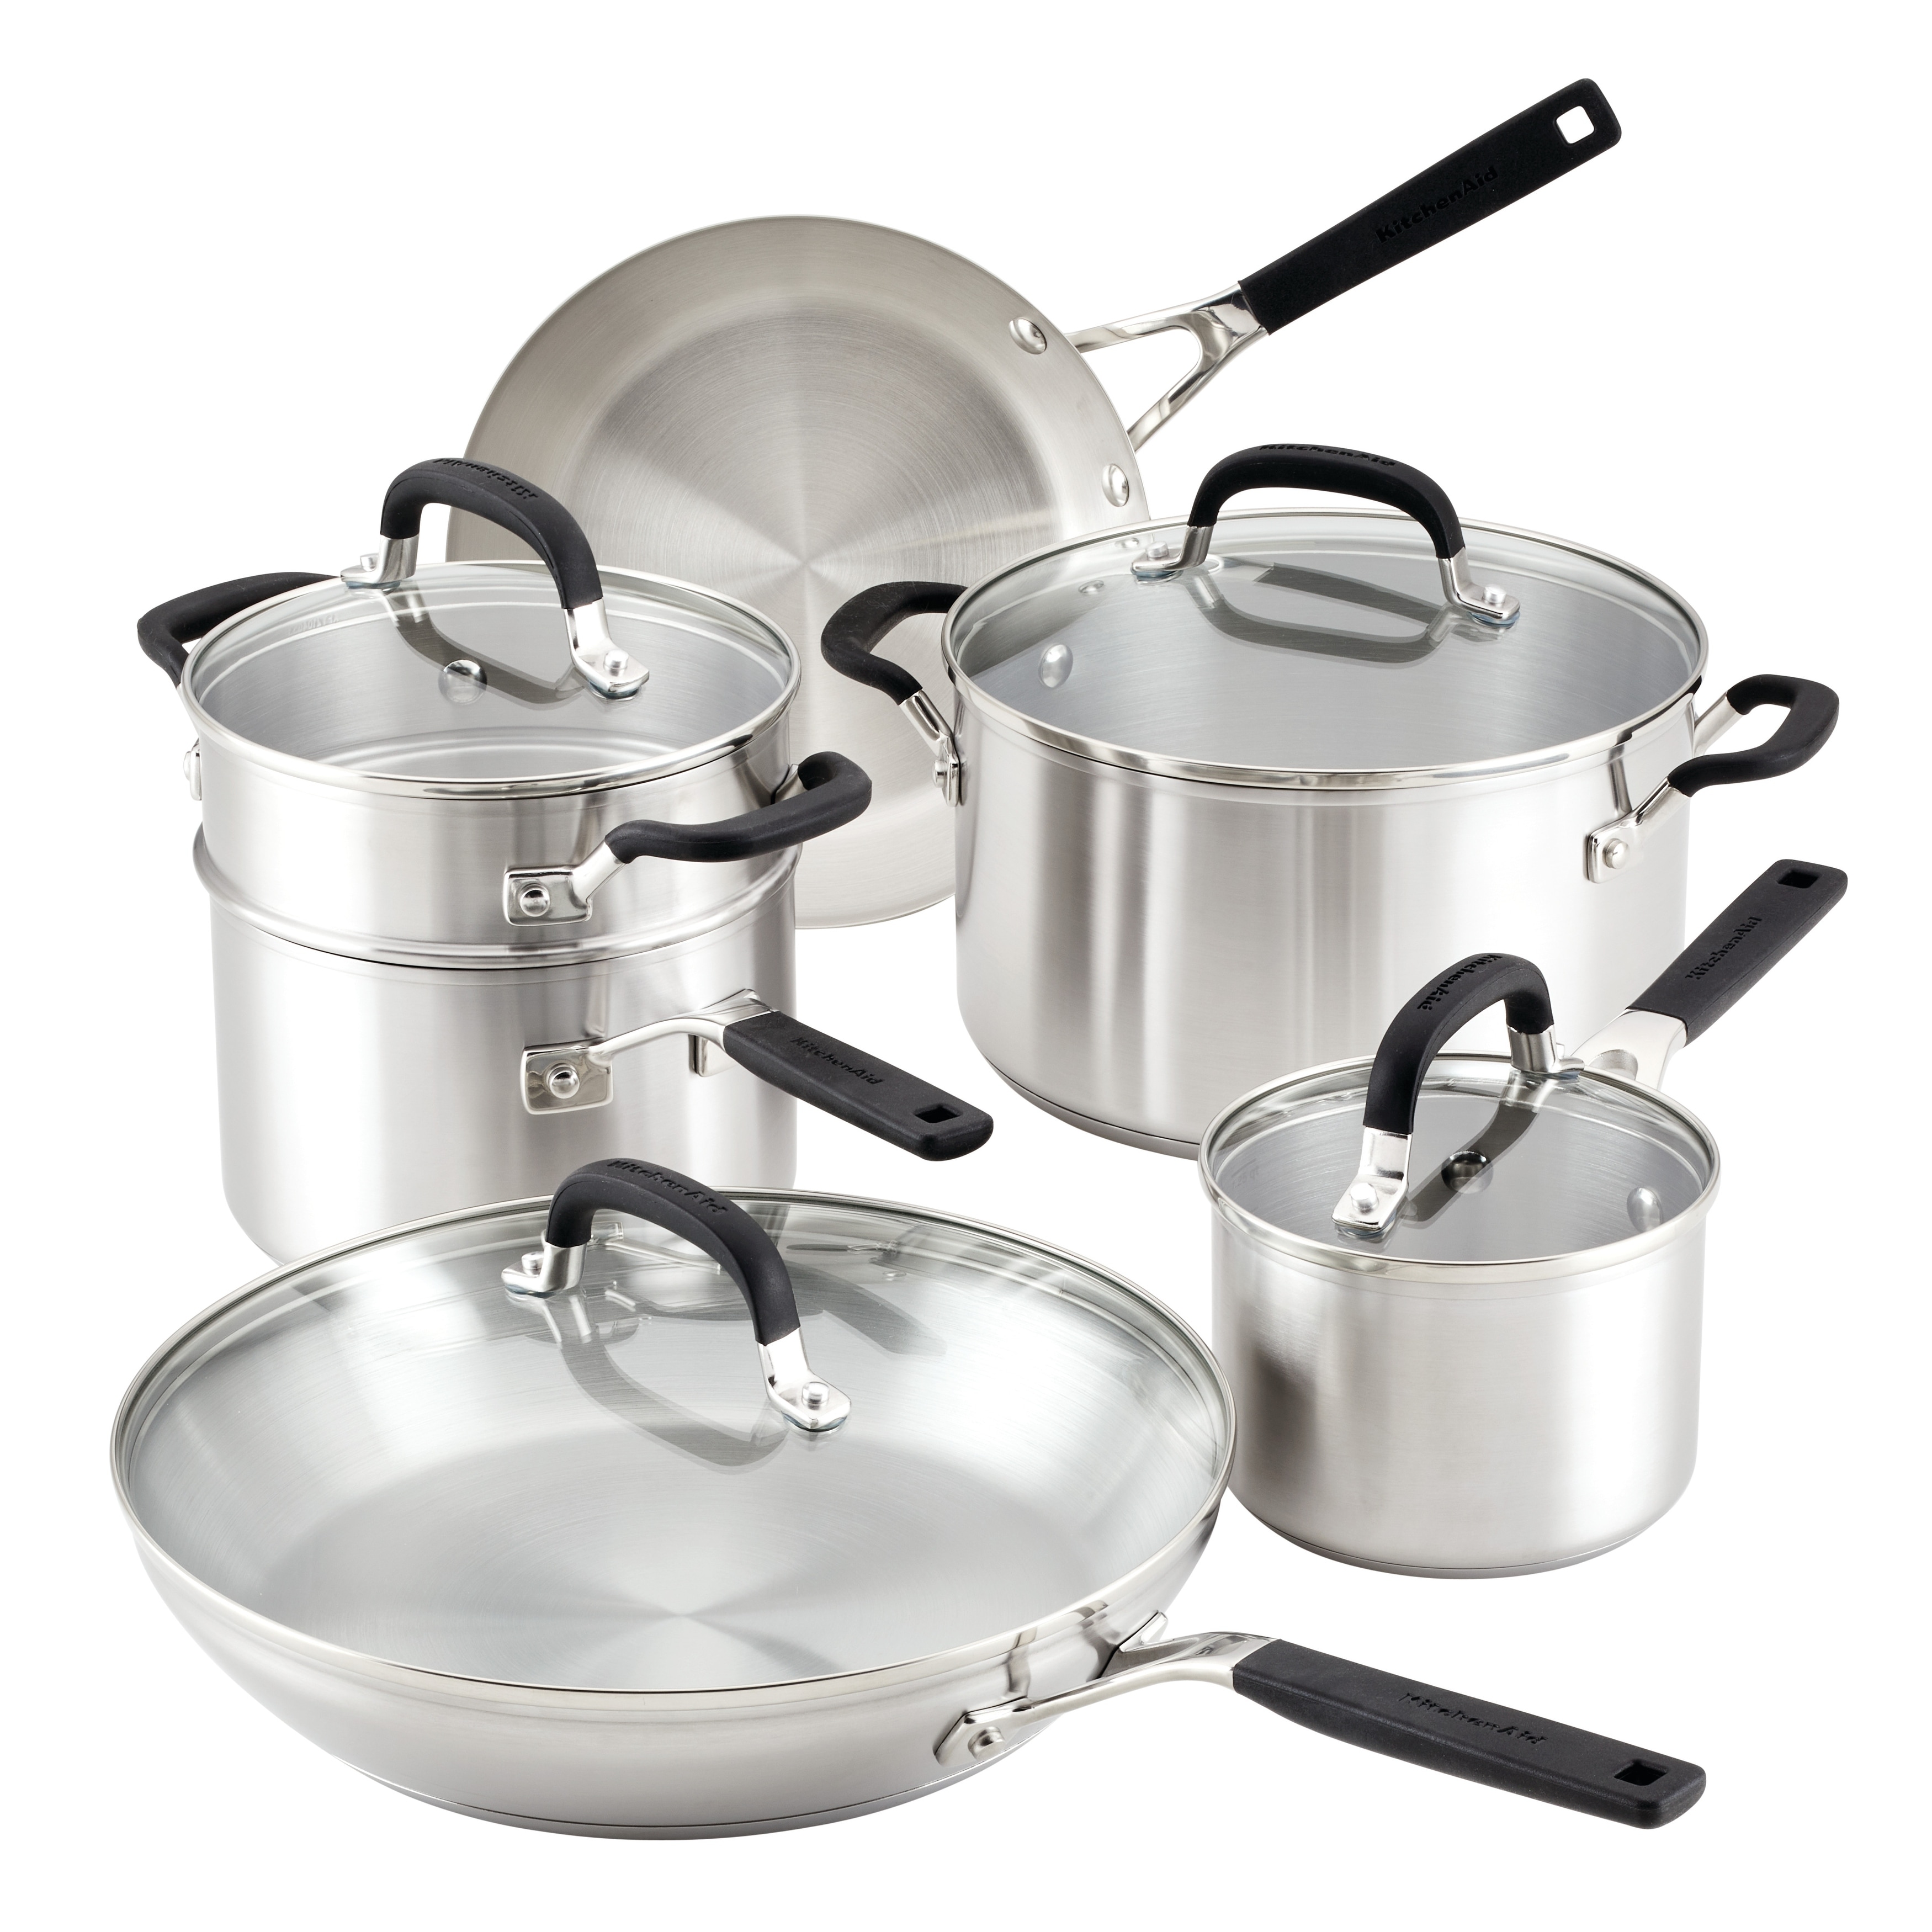 https://ak1.ostkcdn.com/images/products/is/images/direct/ee3d4a7ed3c0a87418c681a9aa873f5720766acb/KitchenAid-Stainless-Steel-Cookware-Induction-Pots-and-Pans-Set%2C-10-Piece%2C-Brushed-Stainless-Steel.jpg